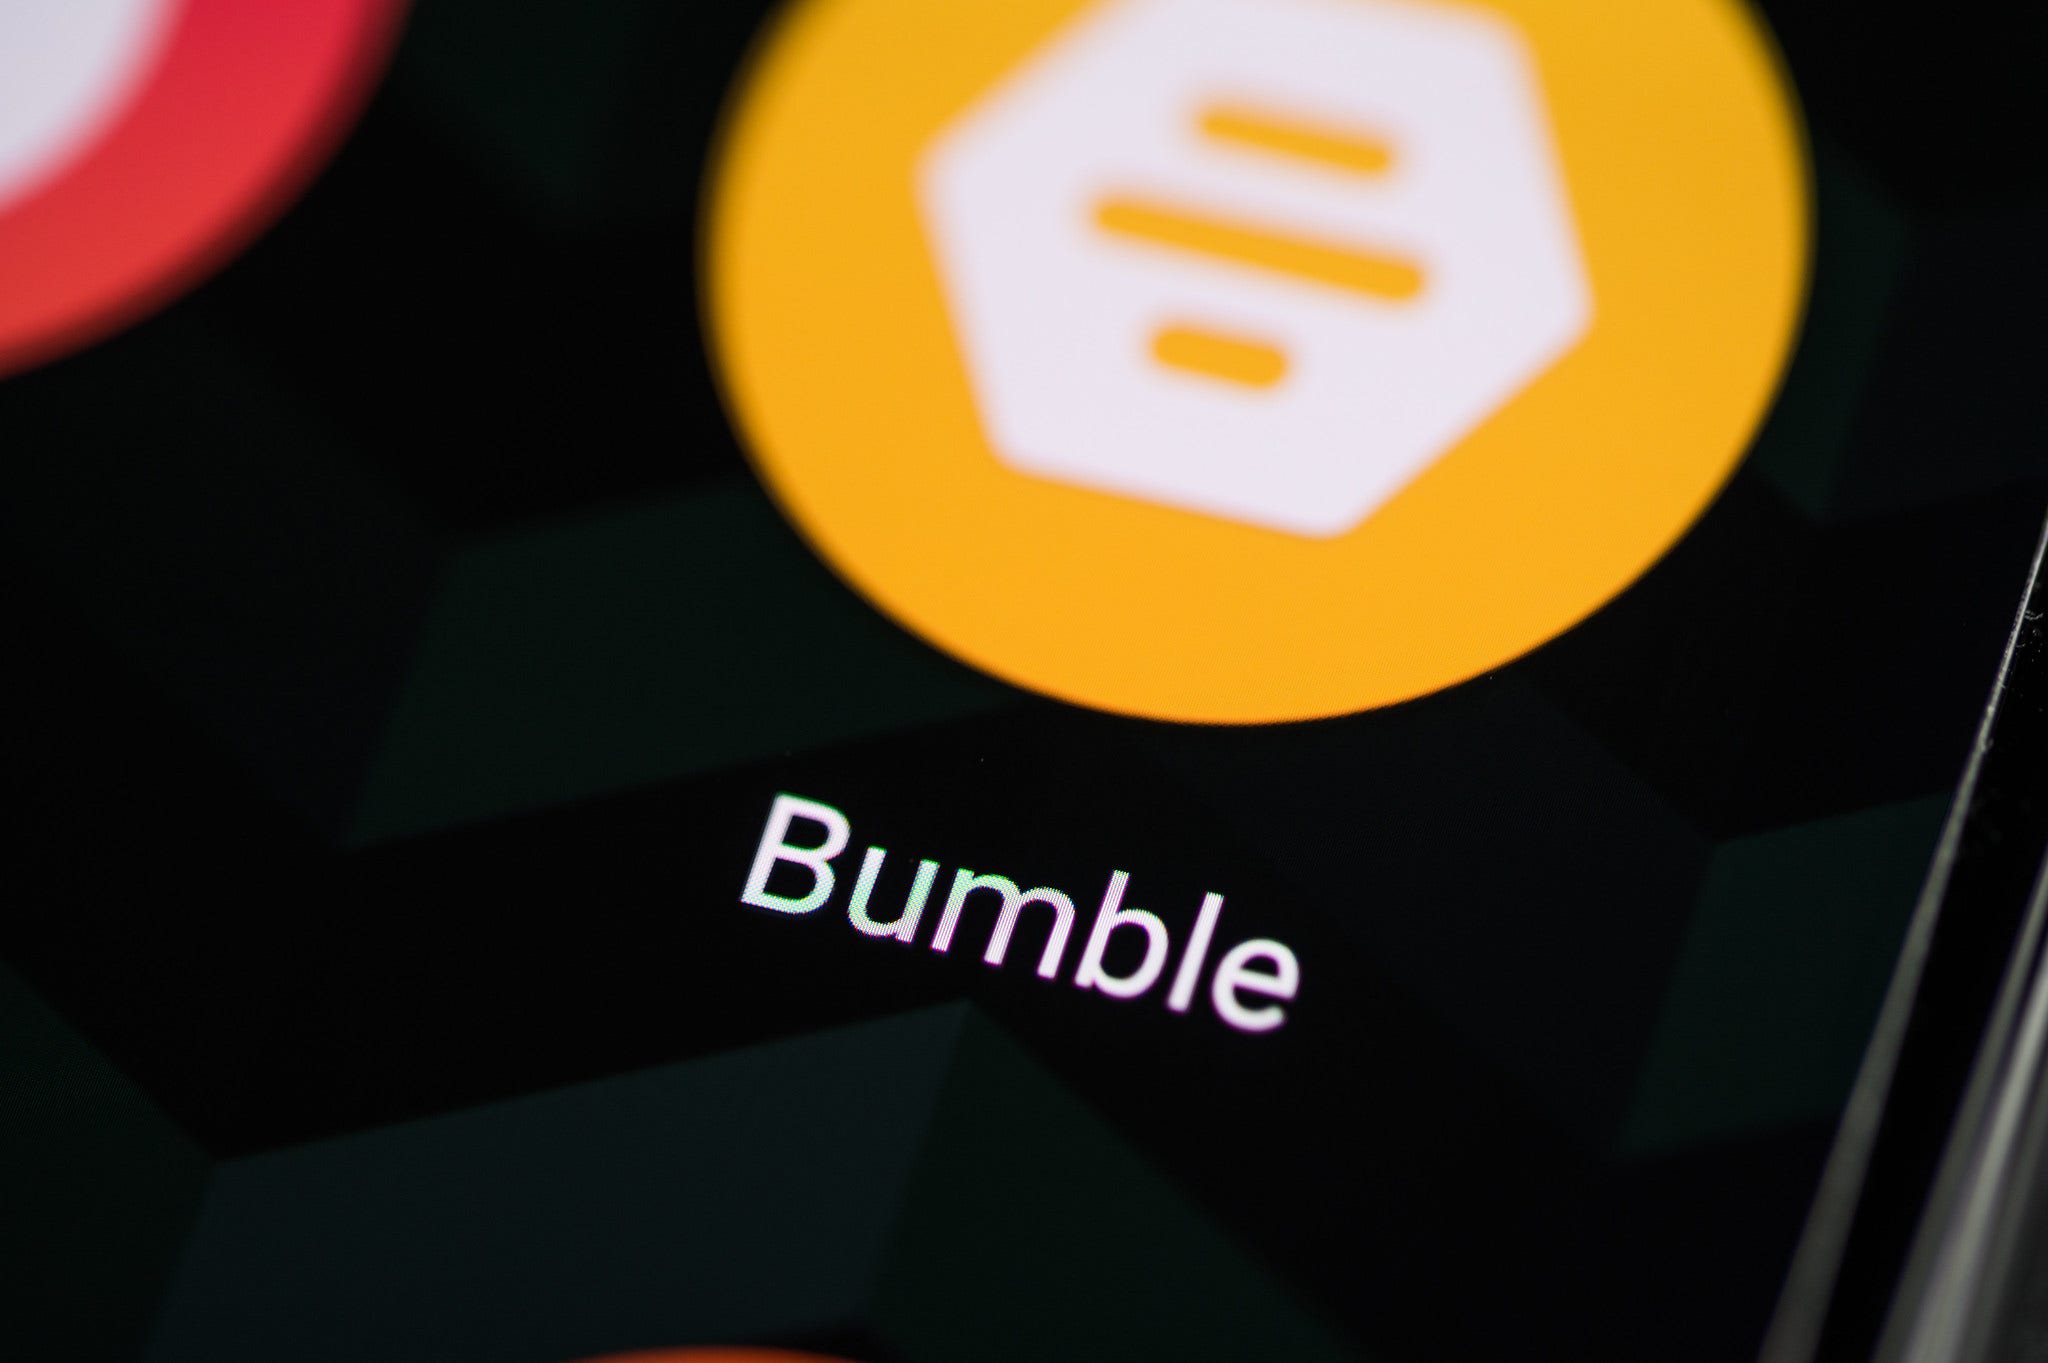 Why Bumble Stock Is Buzzing After Hours